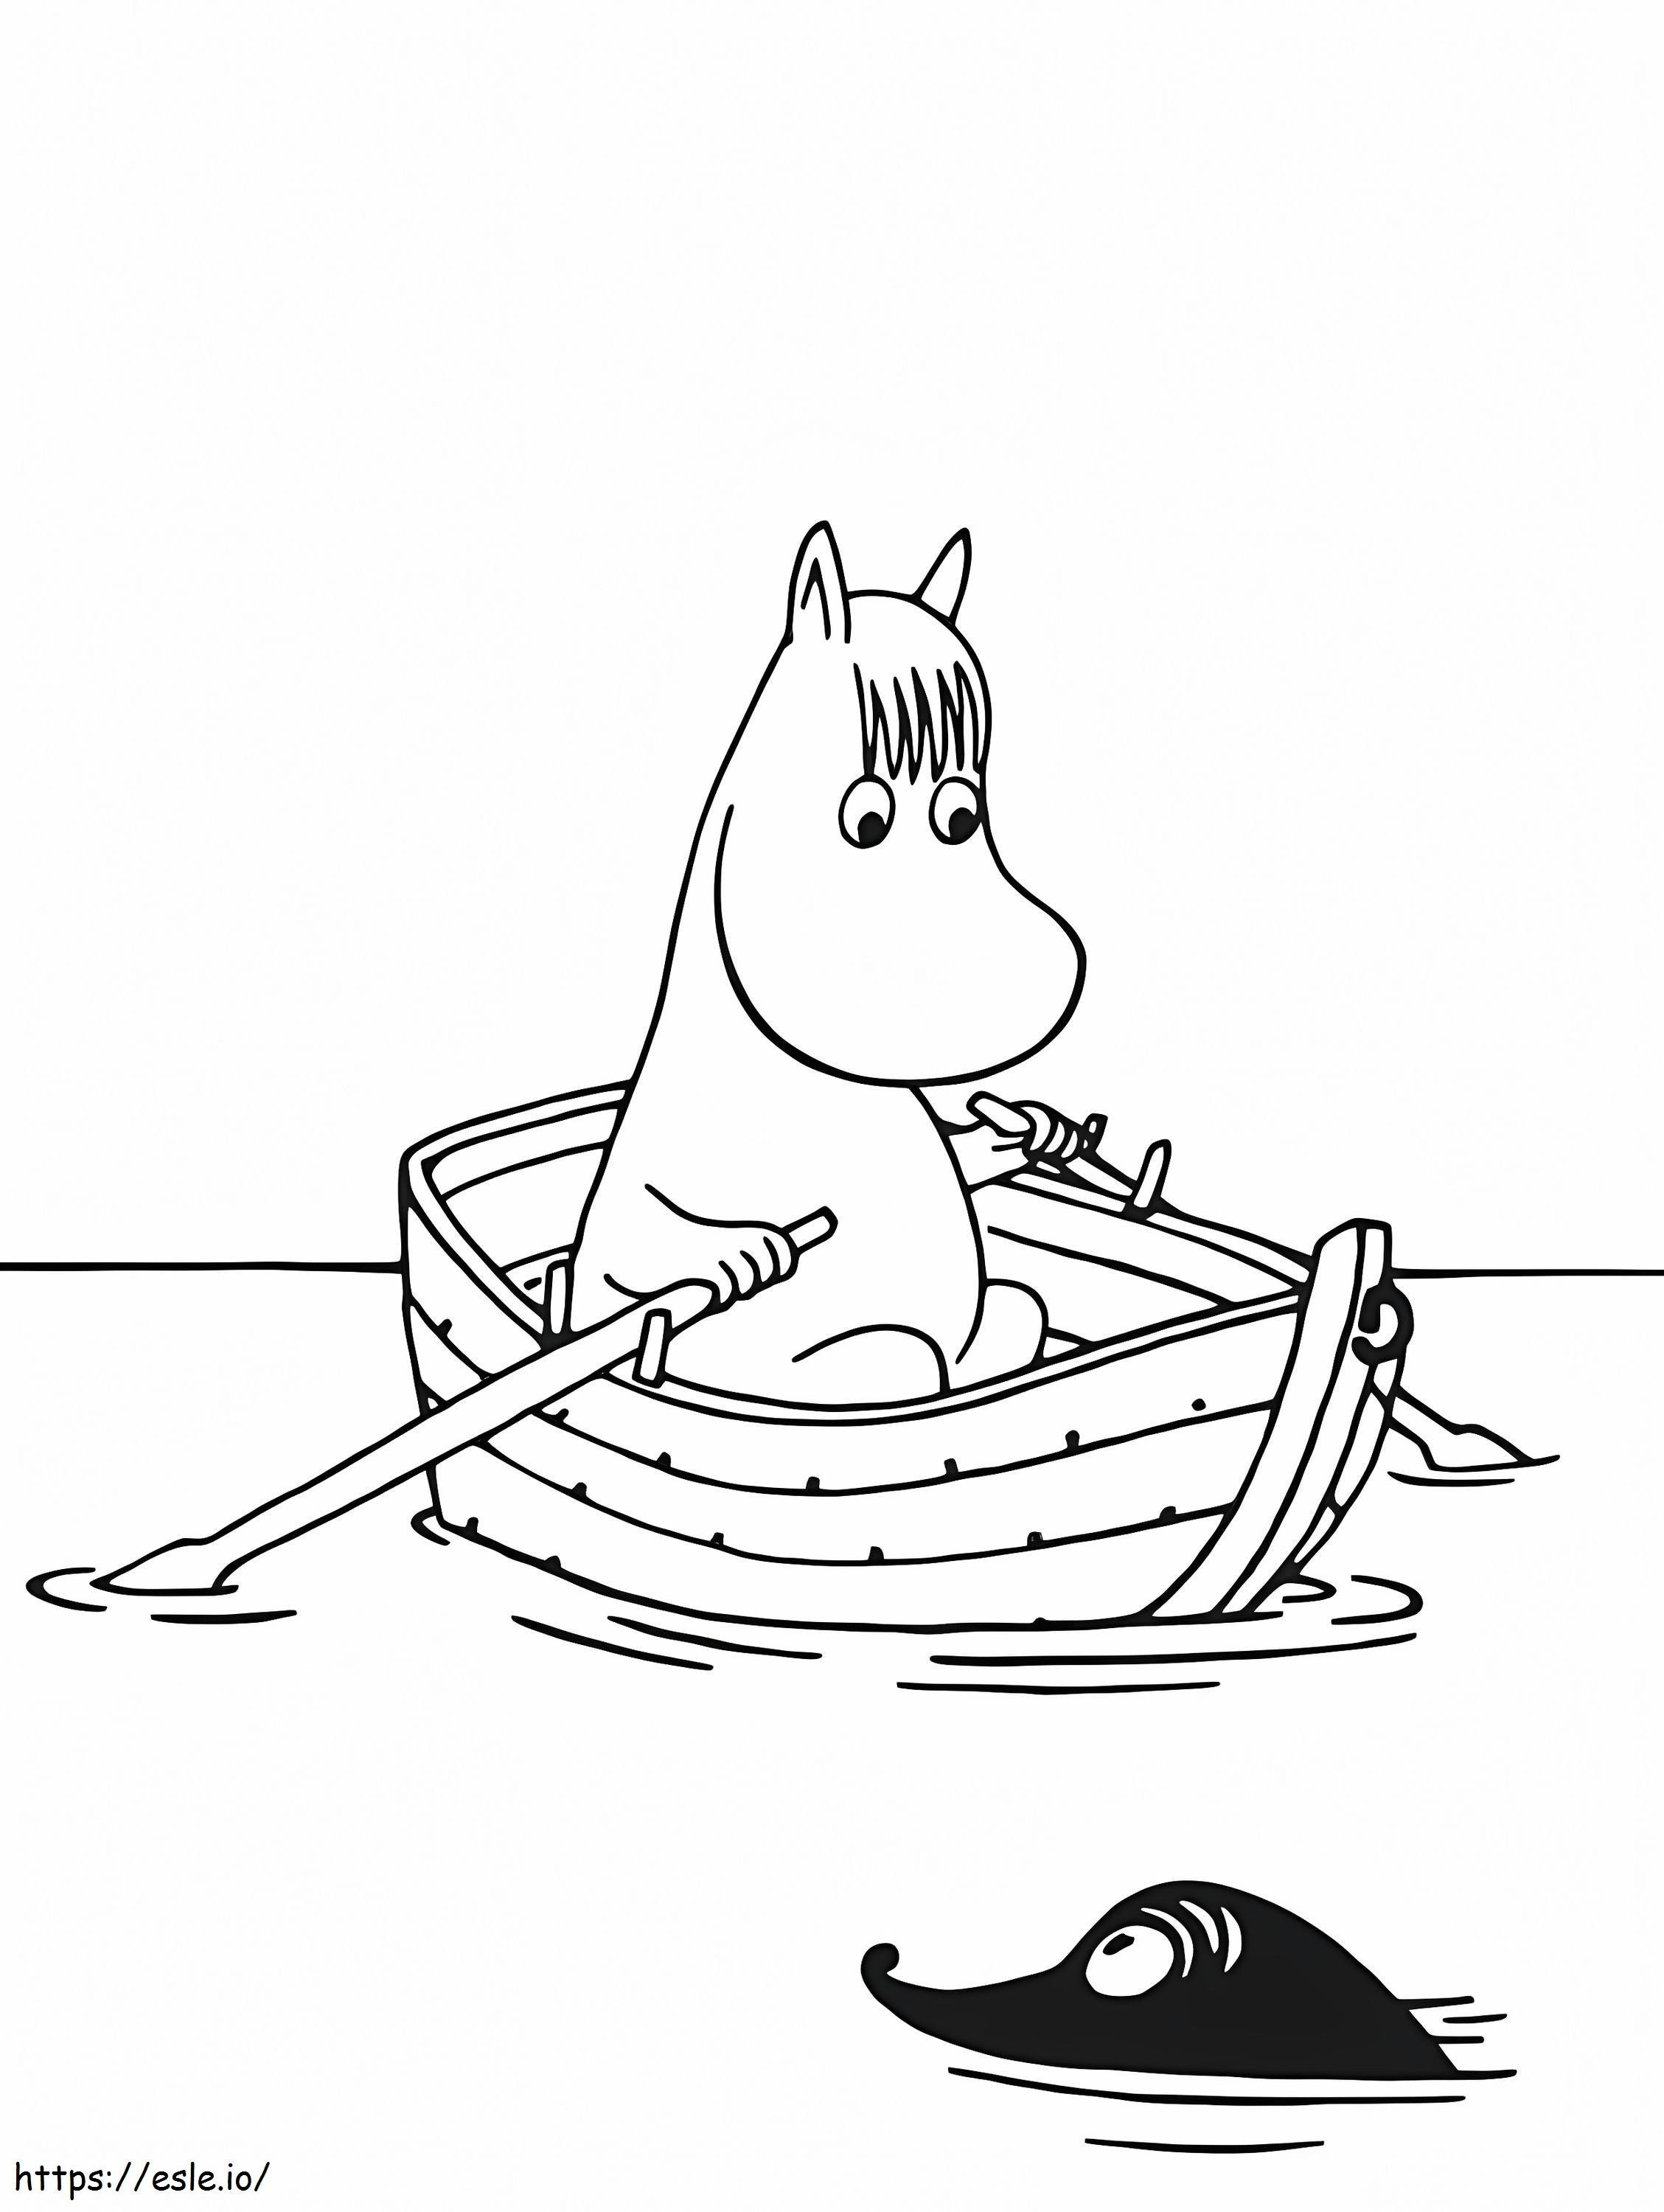 Snorkmaide On Boat coloring page